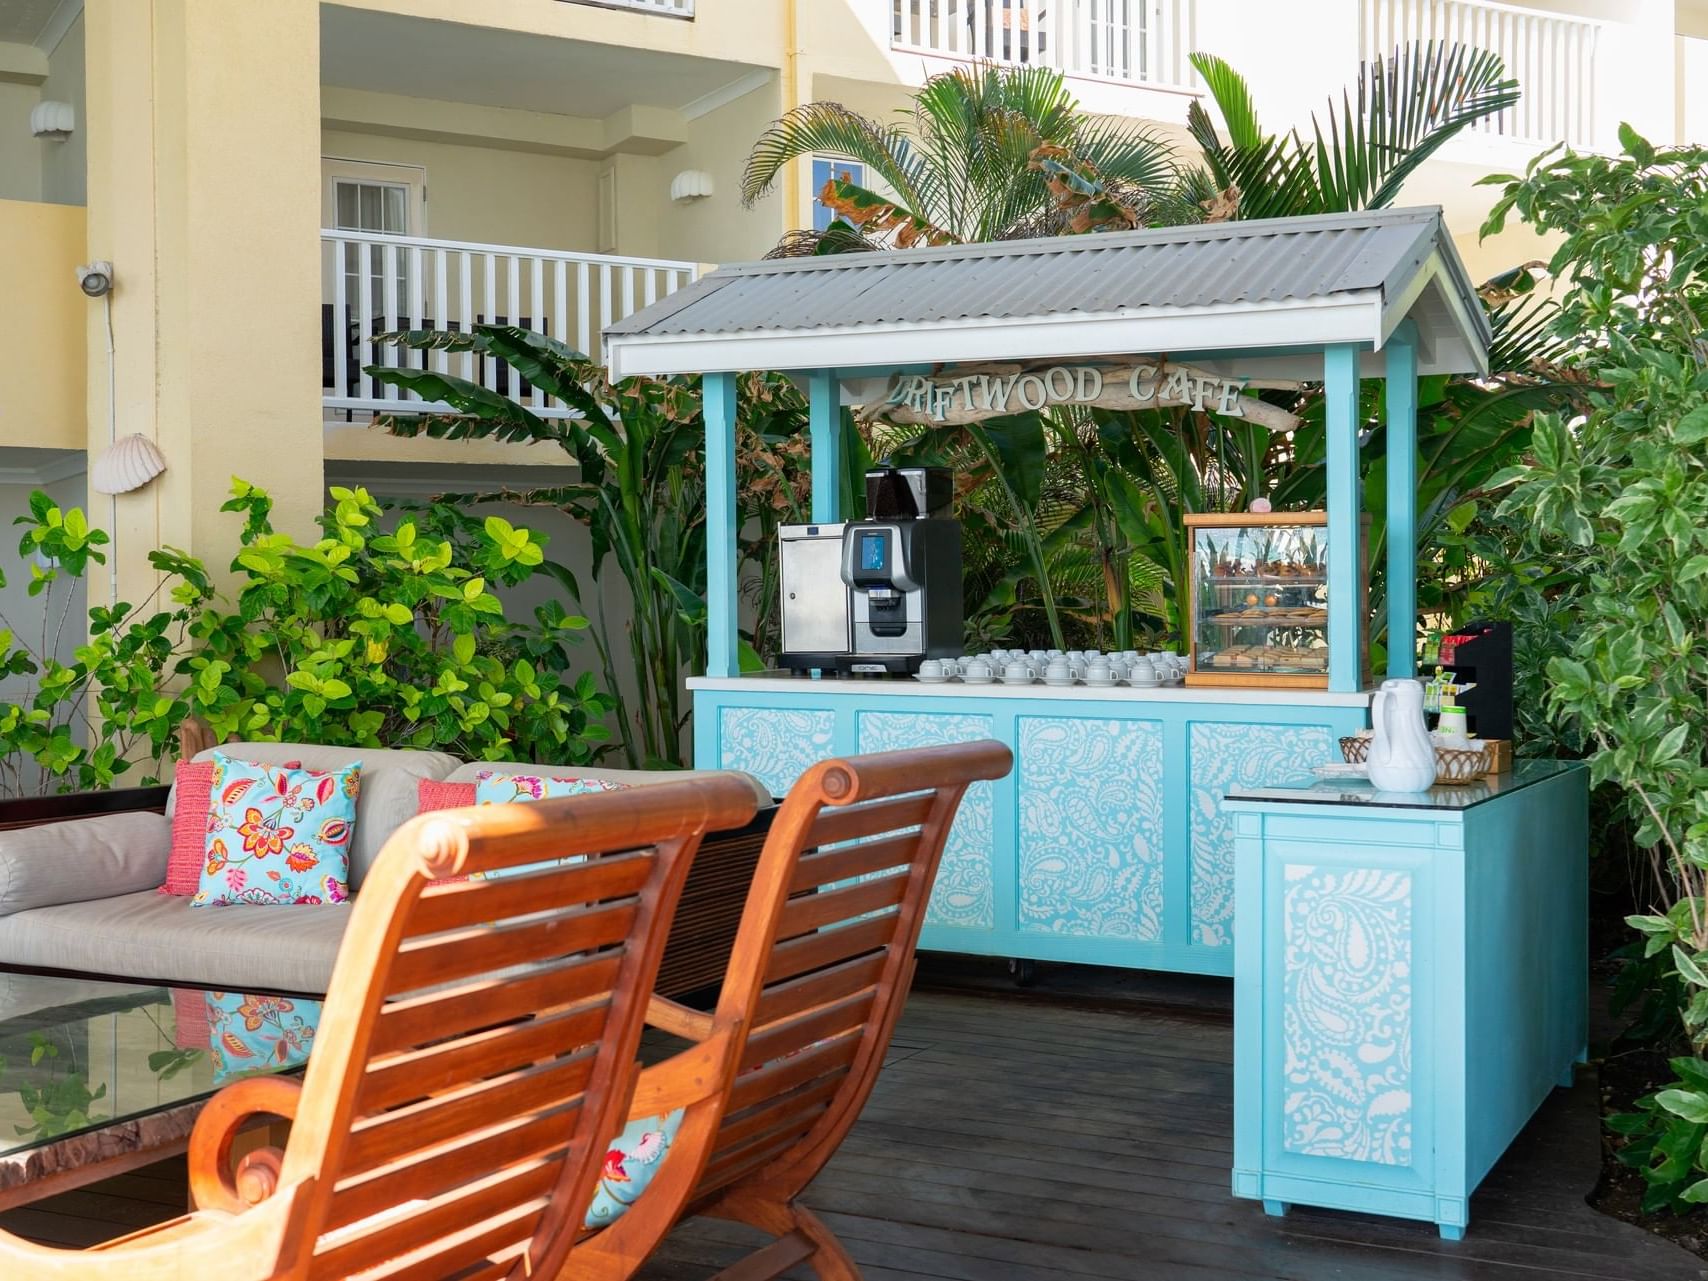 Outdoor seating area in Driftwood cafe at  Sugar Bay Barbados